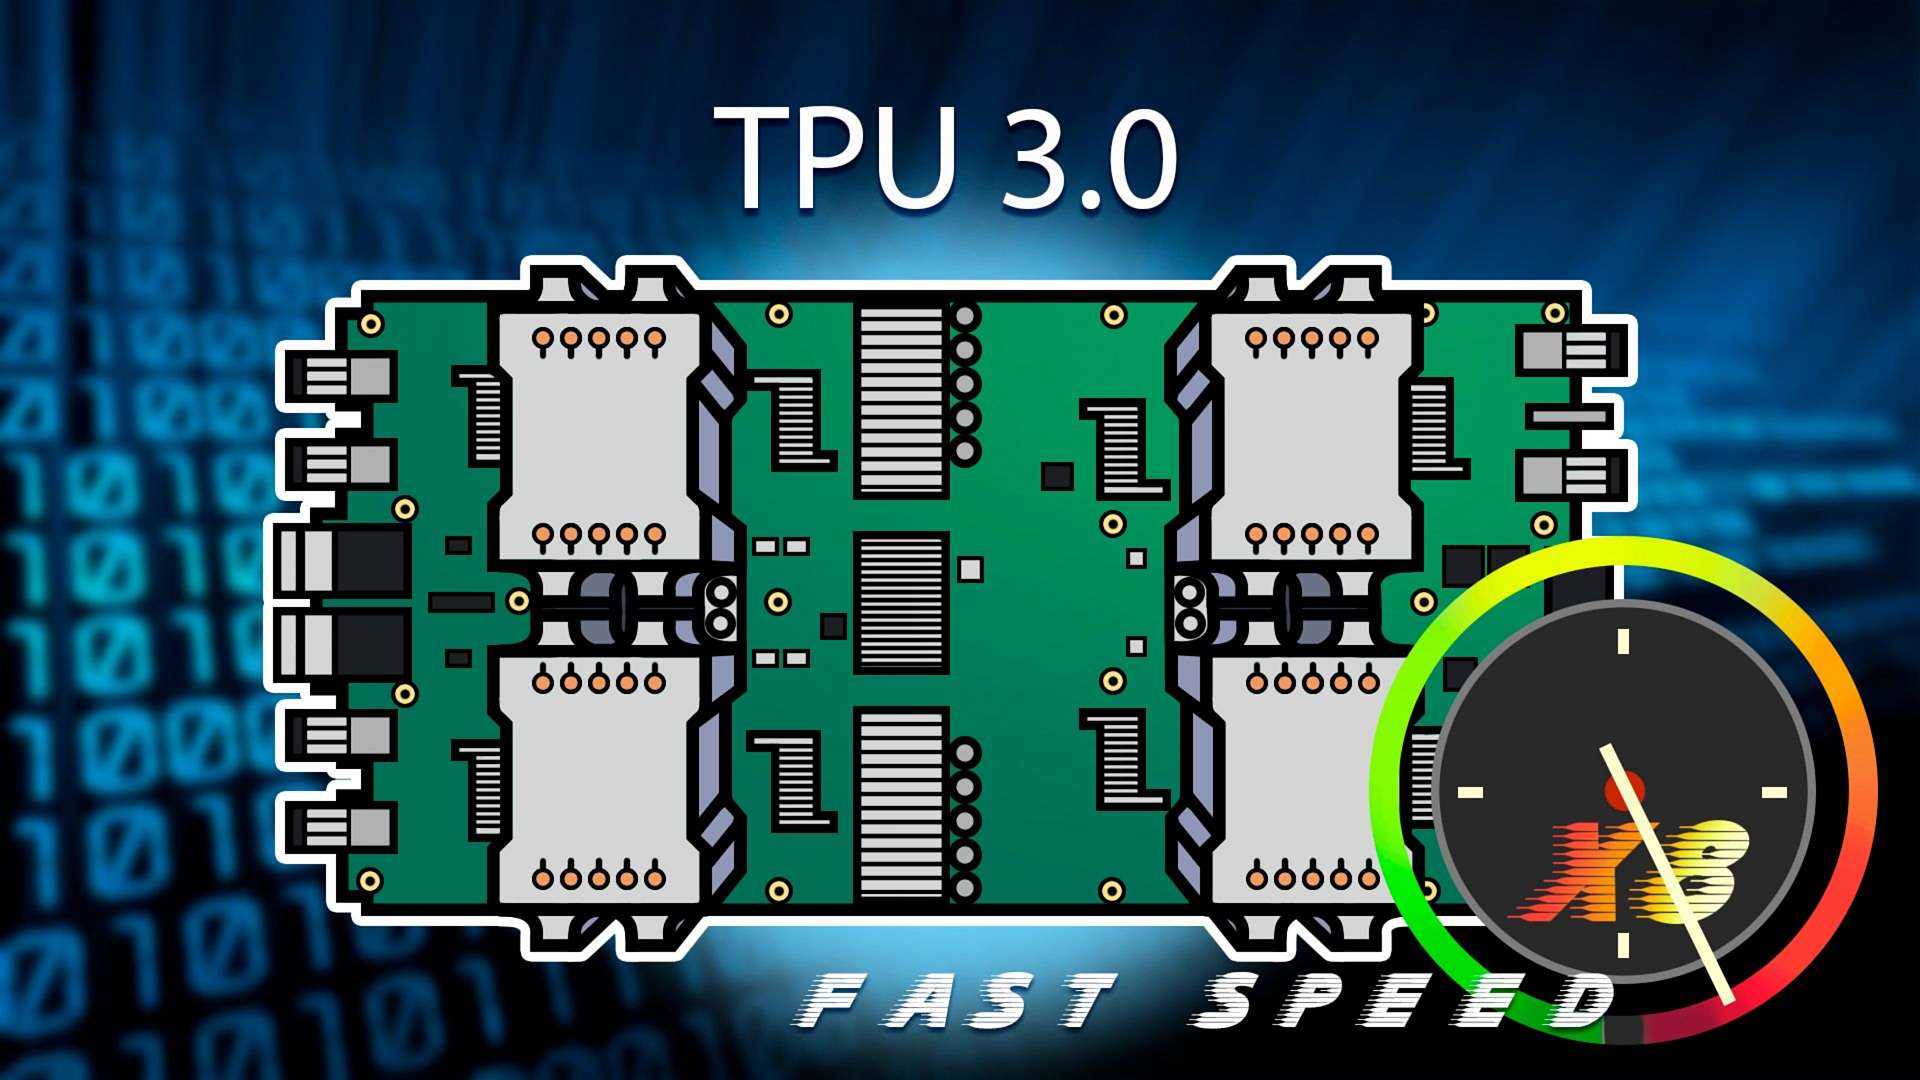 Google’s TPU 3.0 Machine Hardware Accelerates and Becomes Faster